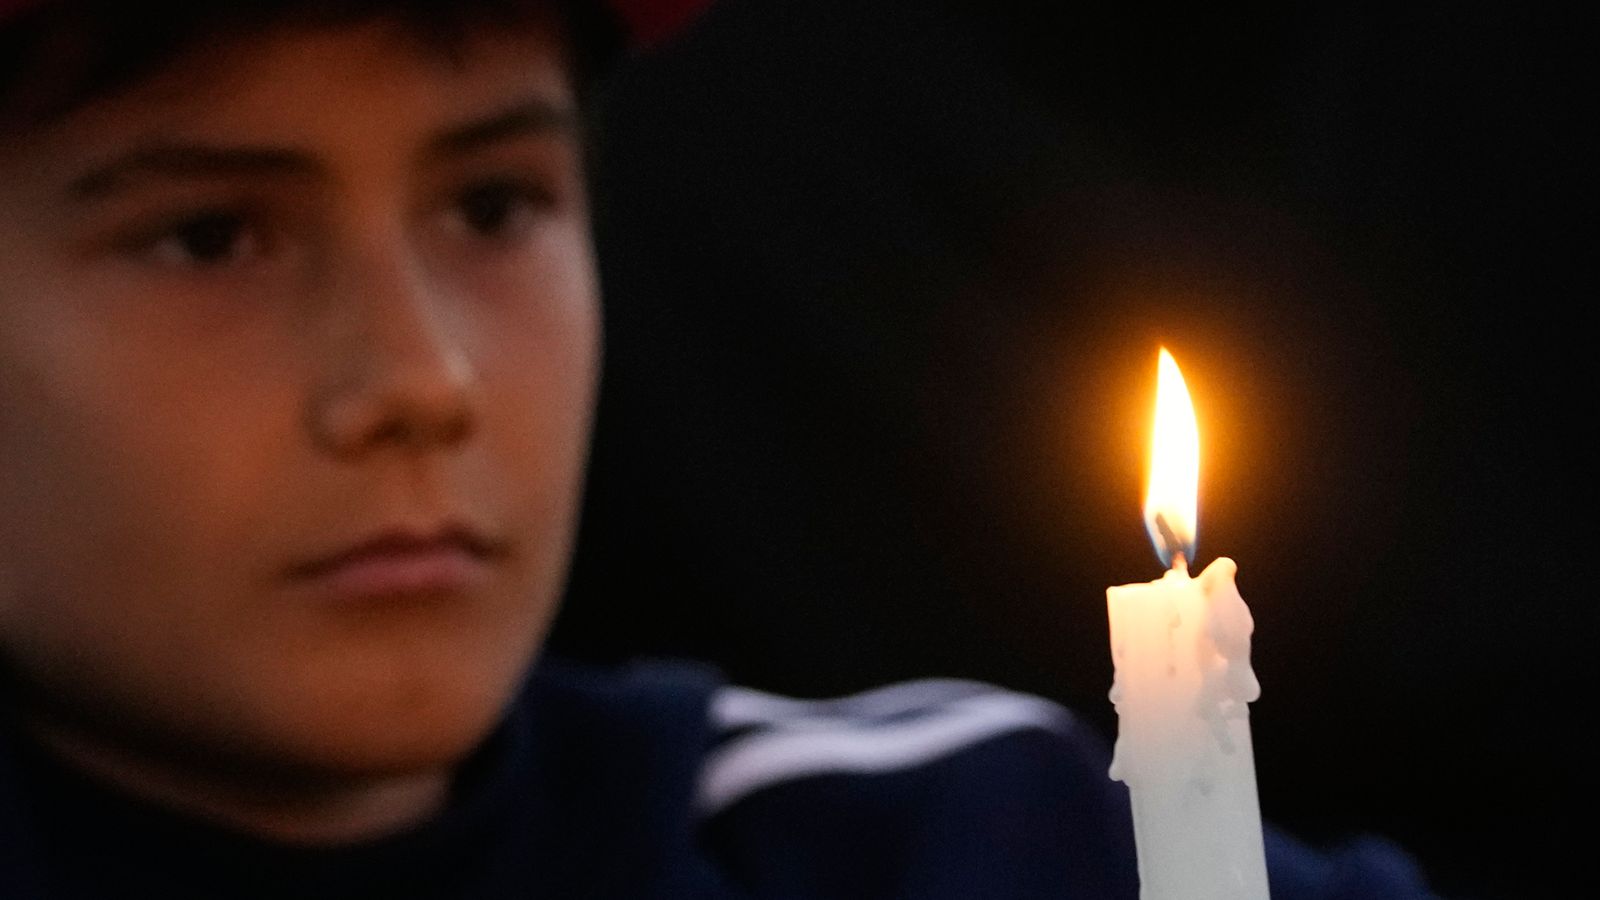 Sydney stabbings attack: Hundreds of mourners gather at candlelight vigil